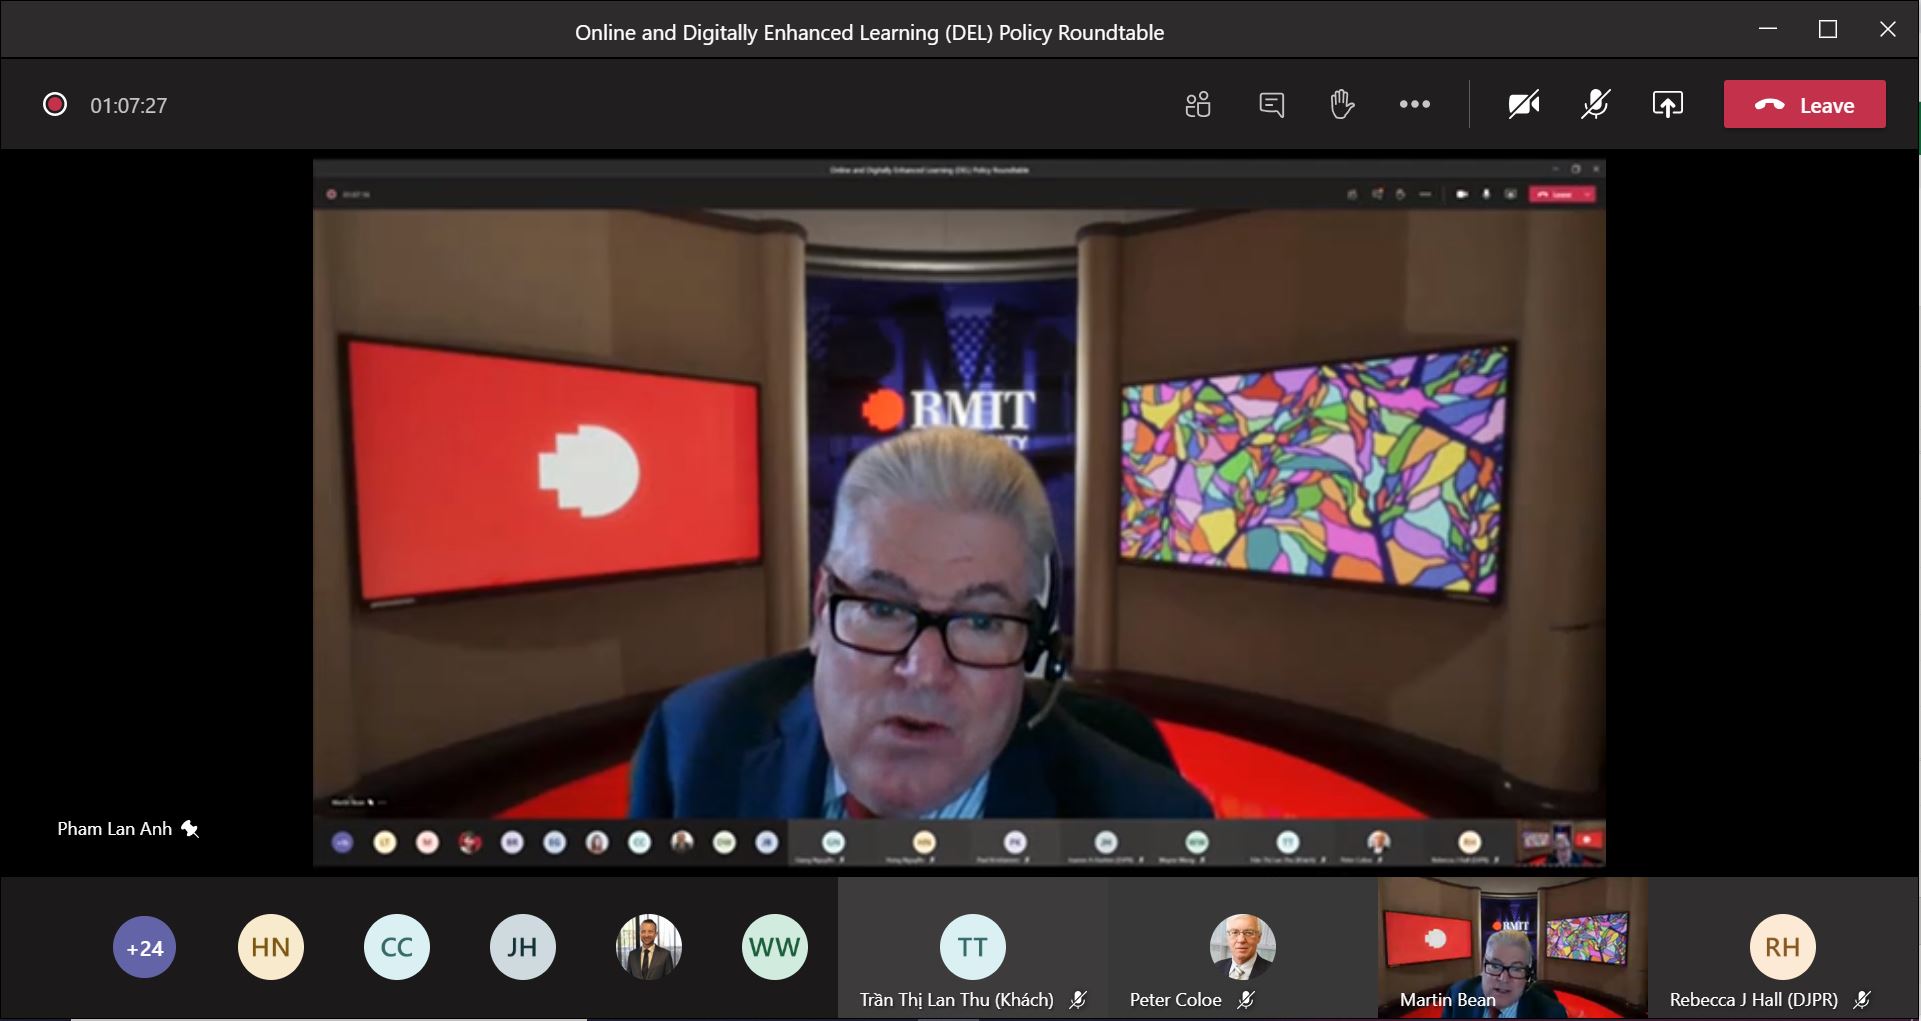 RMIT Vice-Chancellor and President Martin Bean delivered a speech virtually at the roundtable.